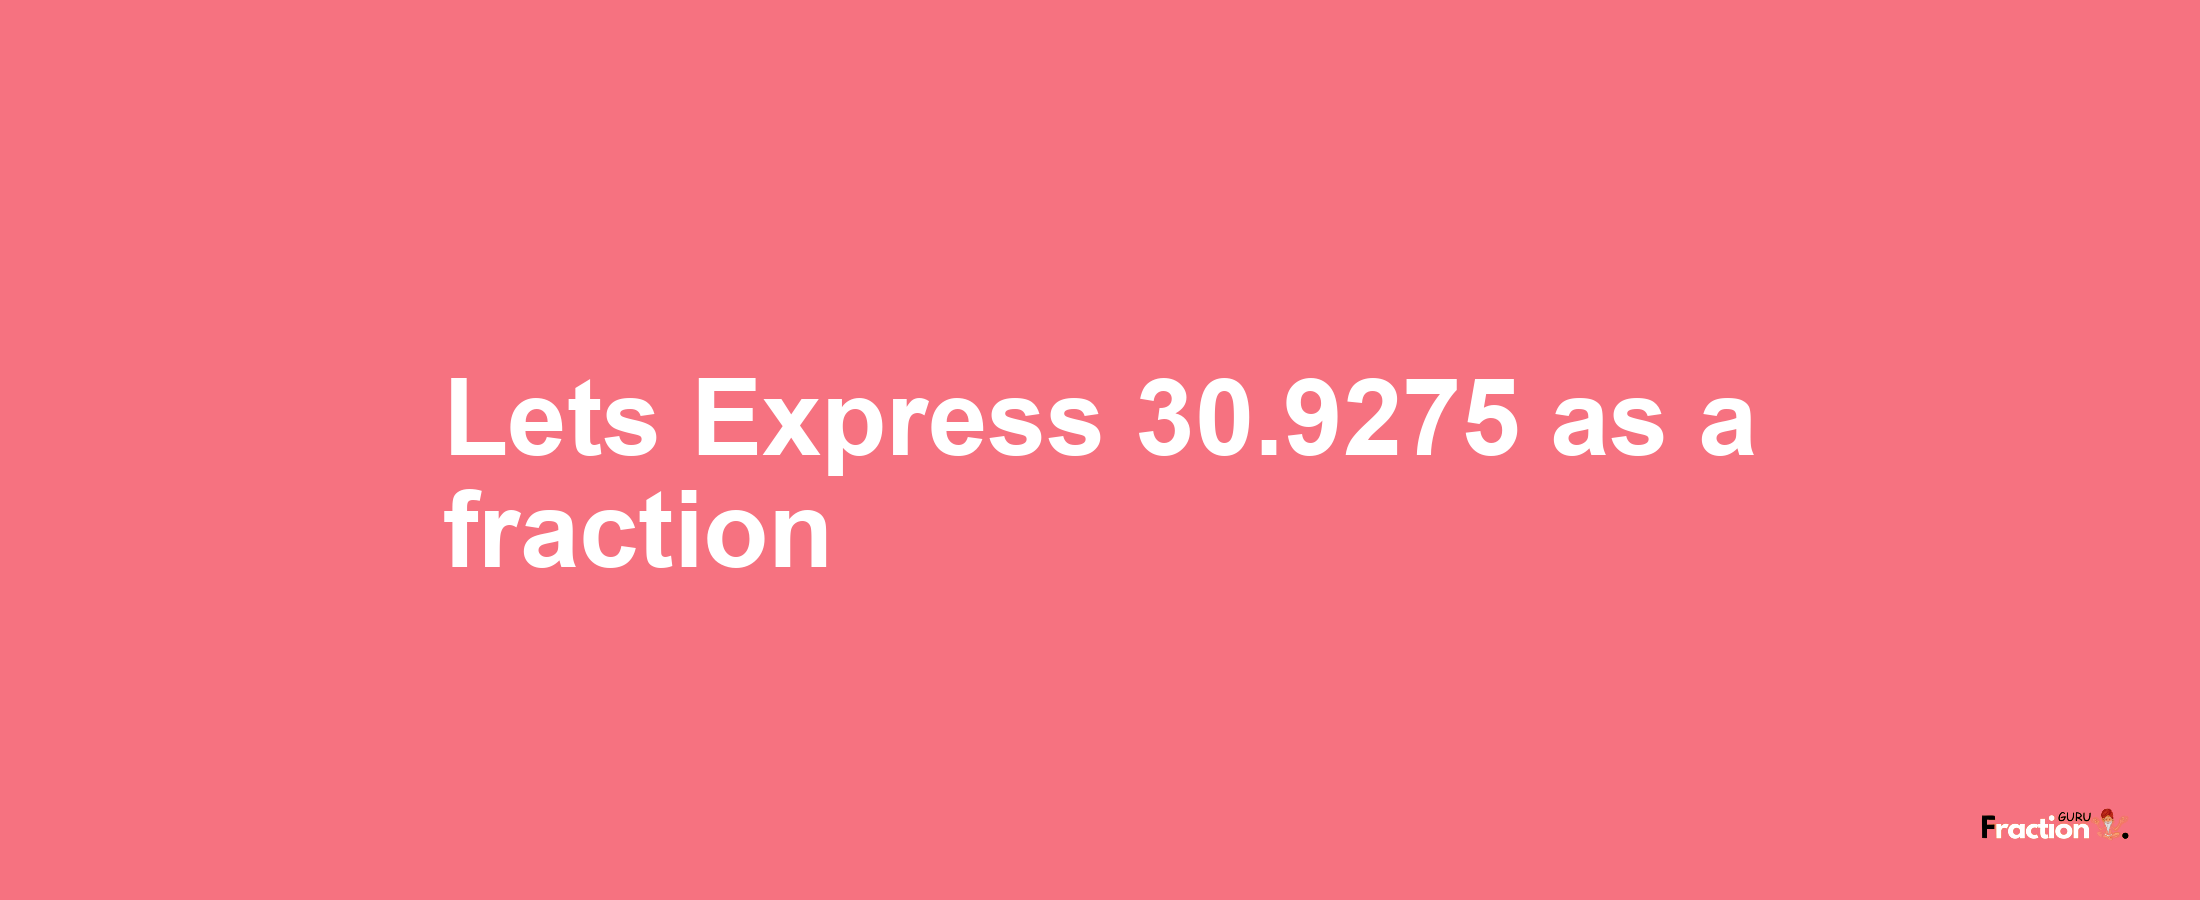 Lets Express 30.9275 as afraction